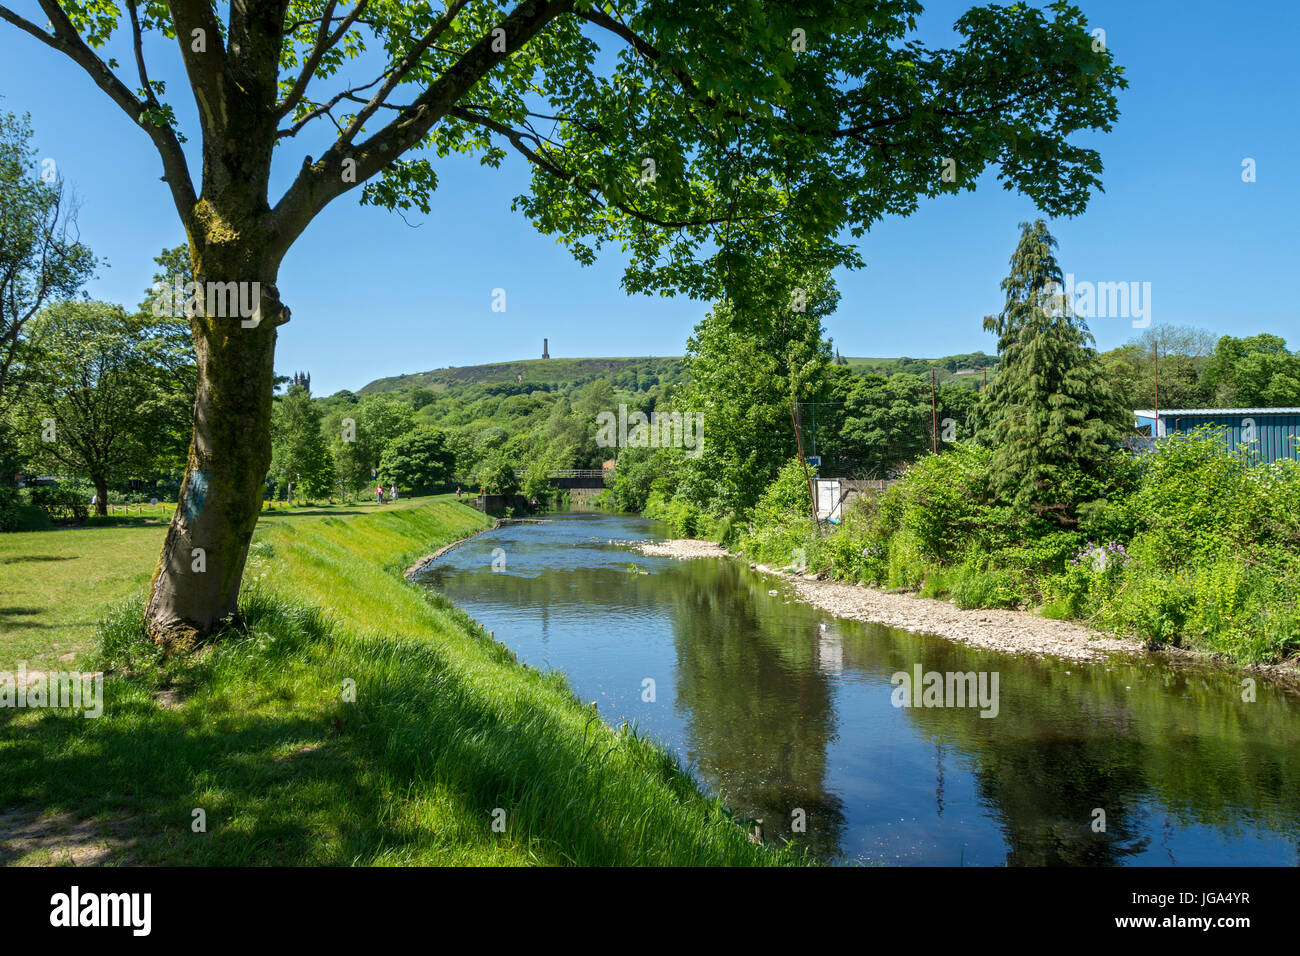 The Peel Tower, or Holcombe Tower, on Holcombe Hill, from the river Irwell at Ramsbottom, Greater Manchester, UK. Stock Photo